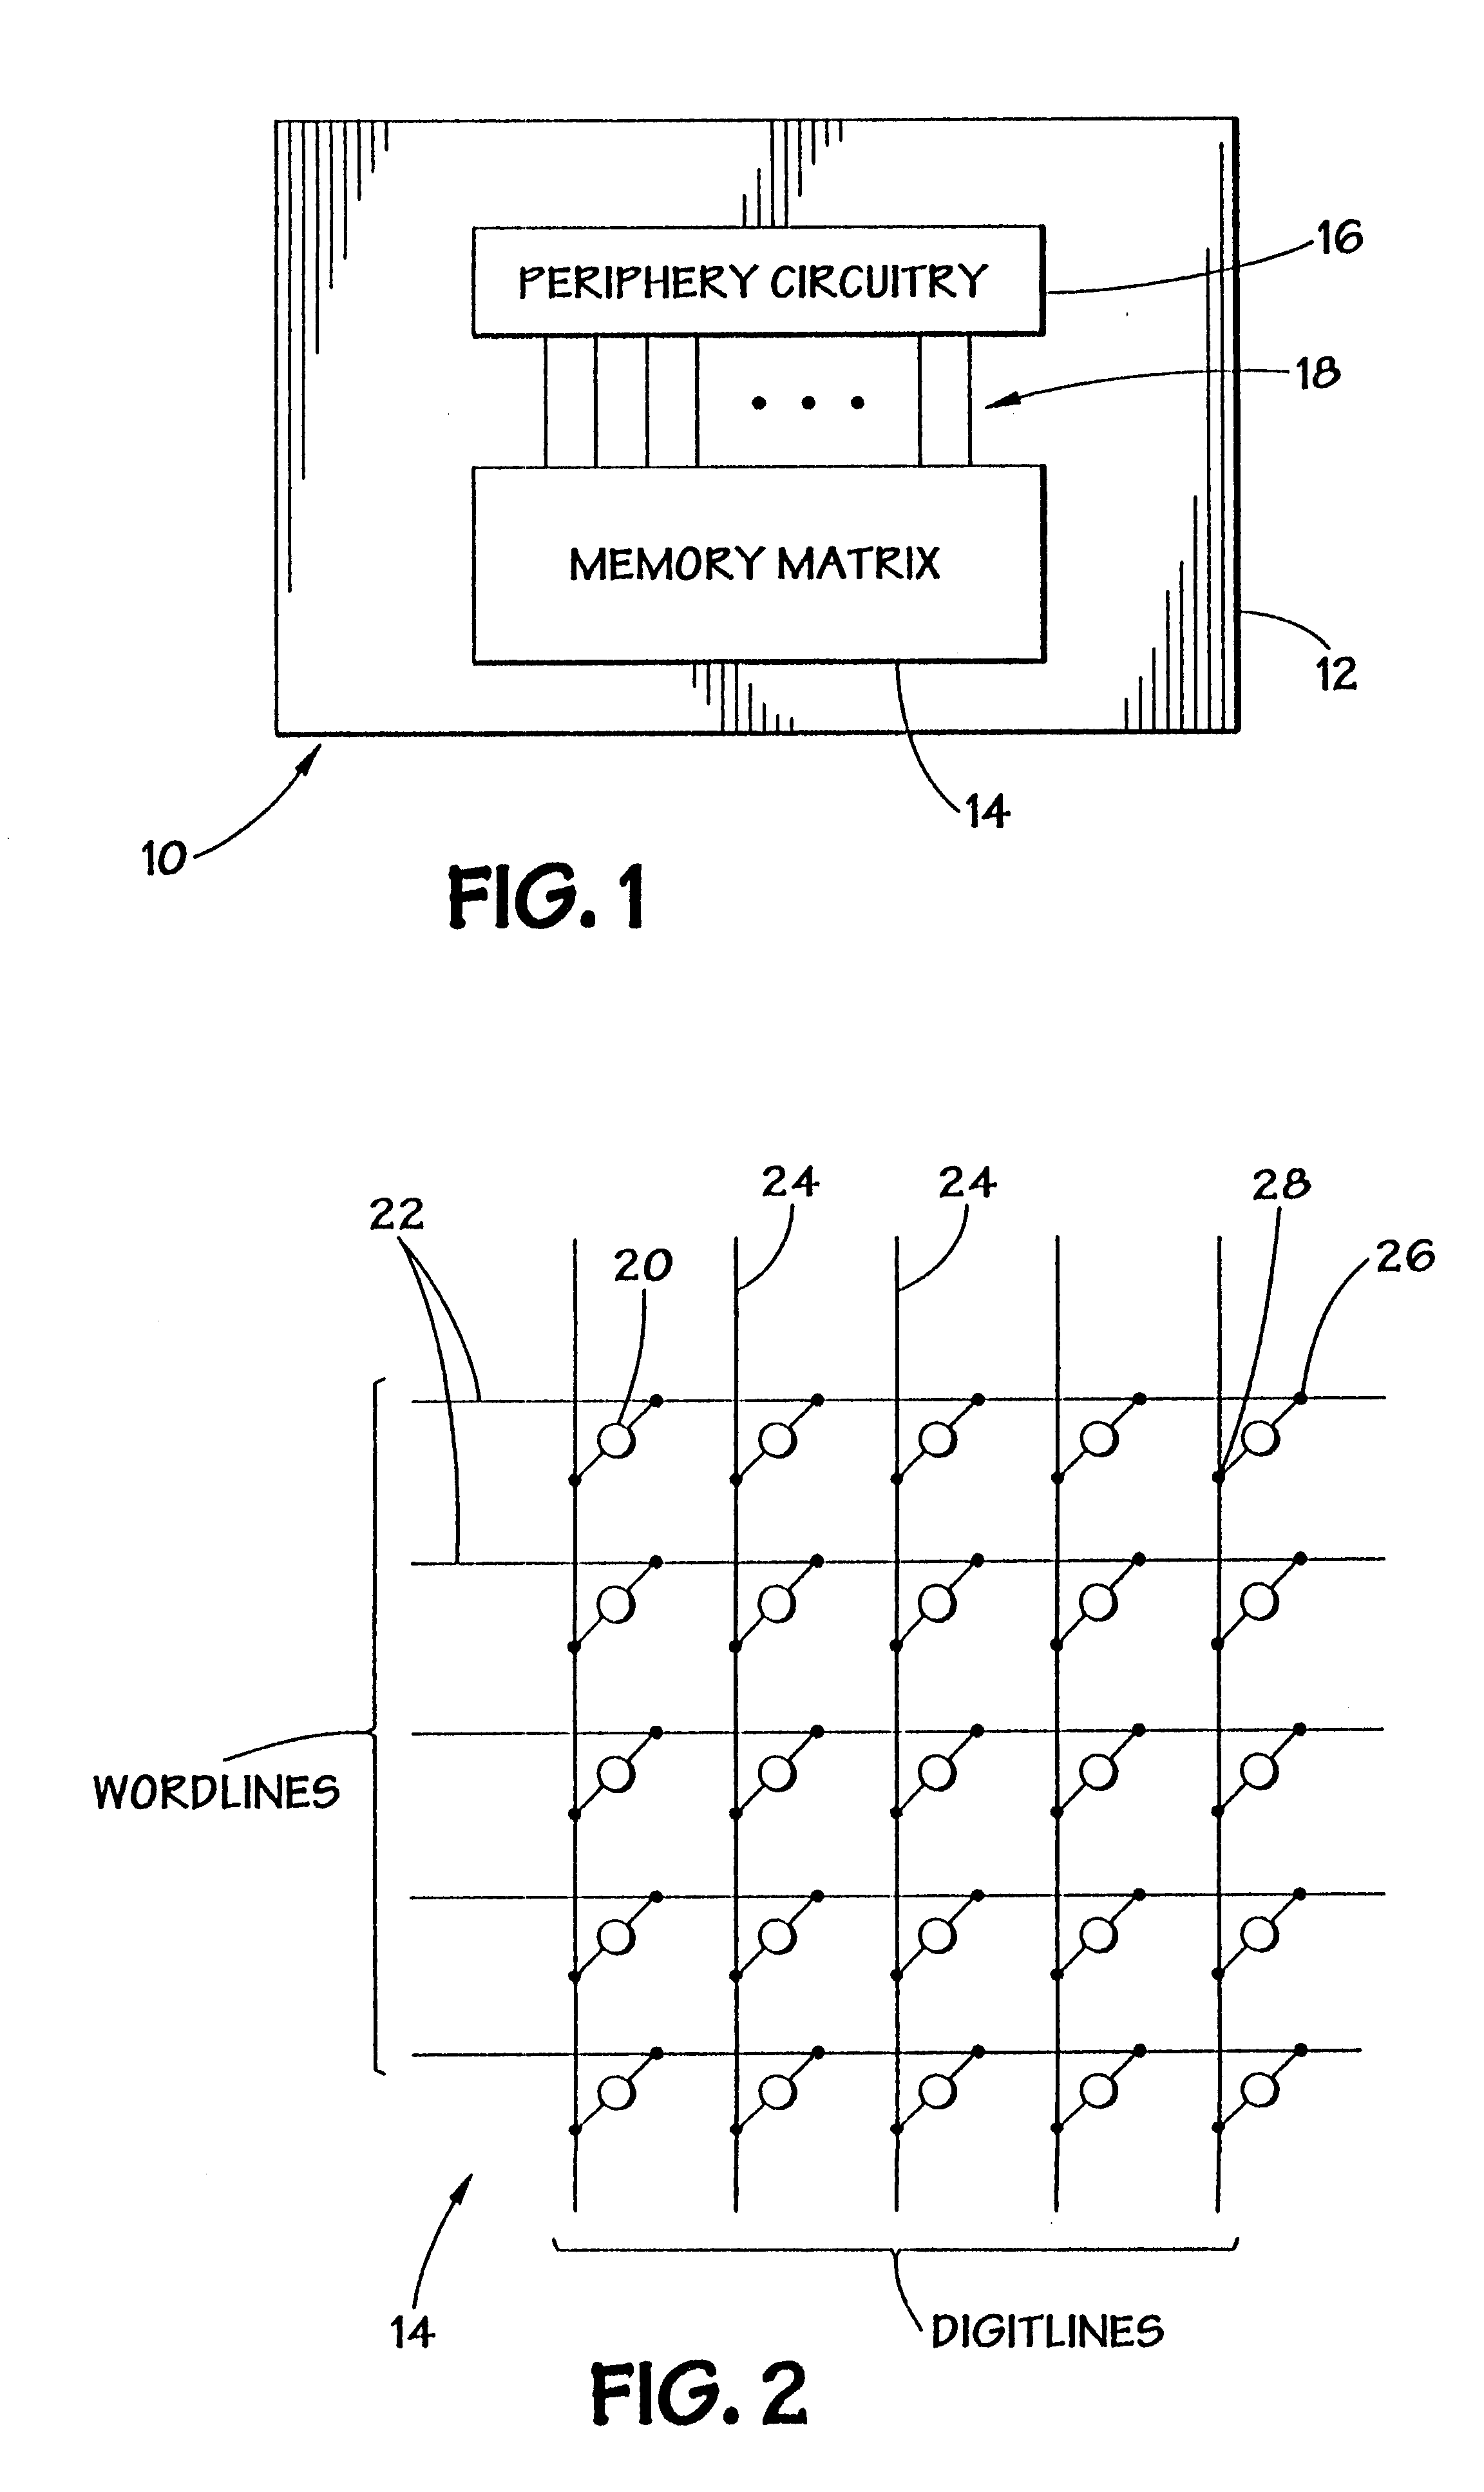 Method of forming a contact structure in a semiconductor device